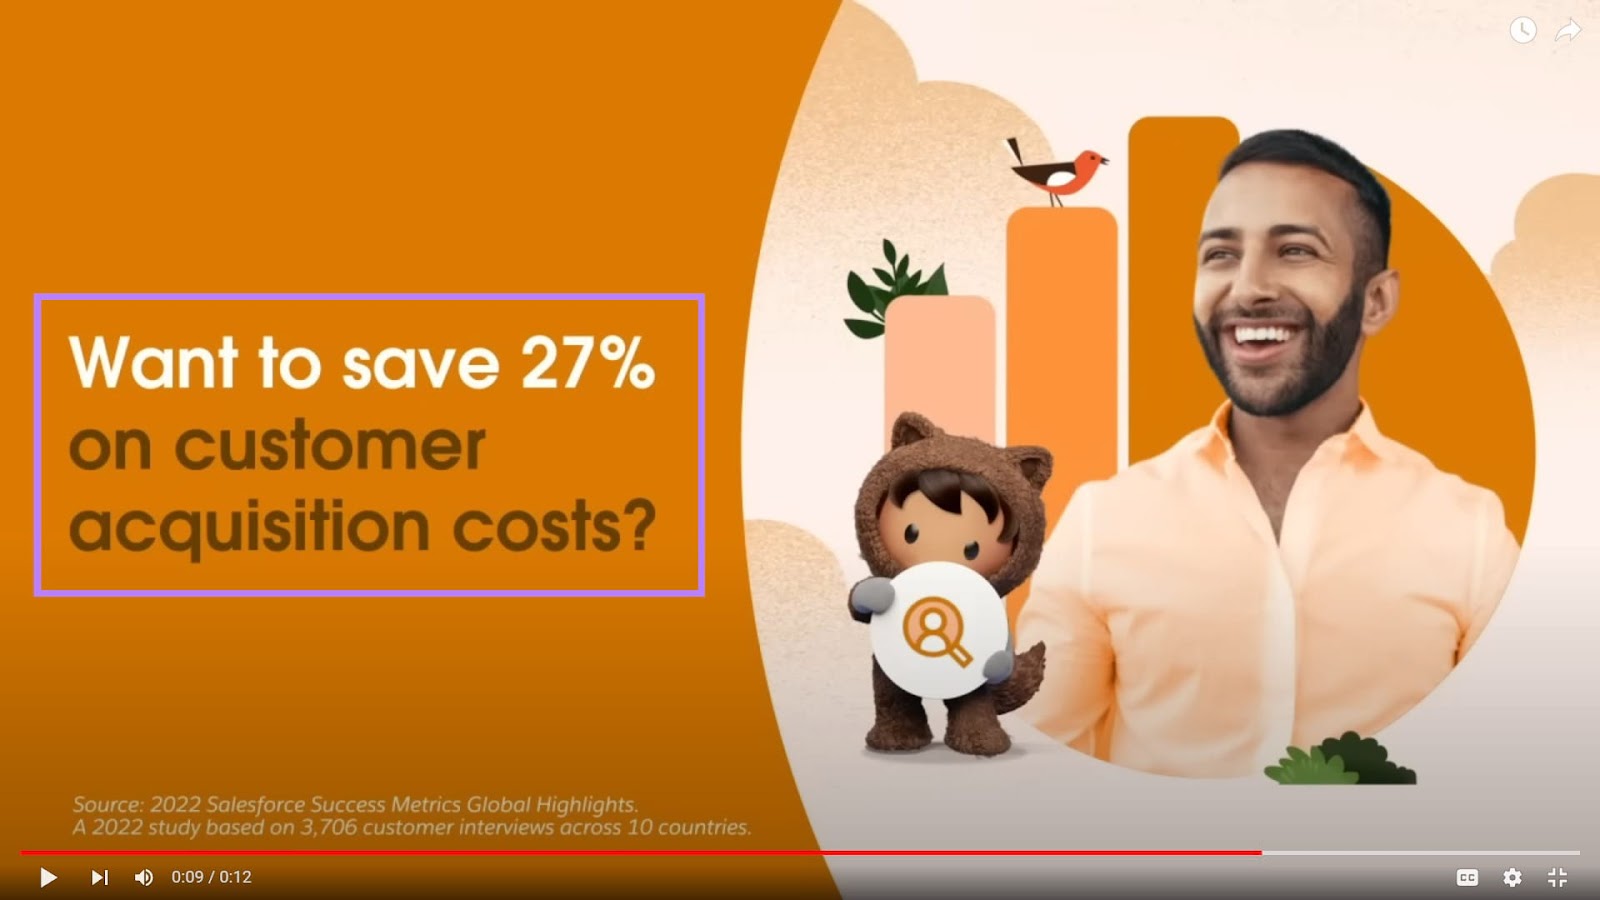 Salesforce' video ad screenshot with “Want to save 27% on customer acquisition costs?” copy